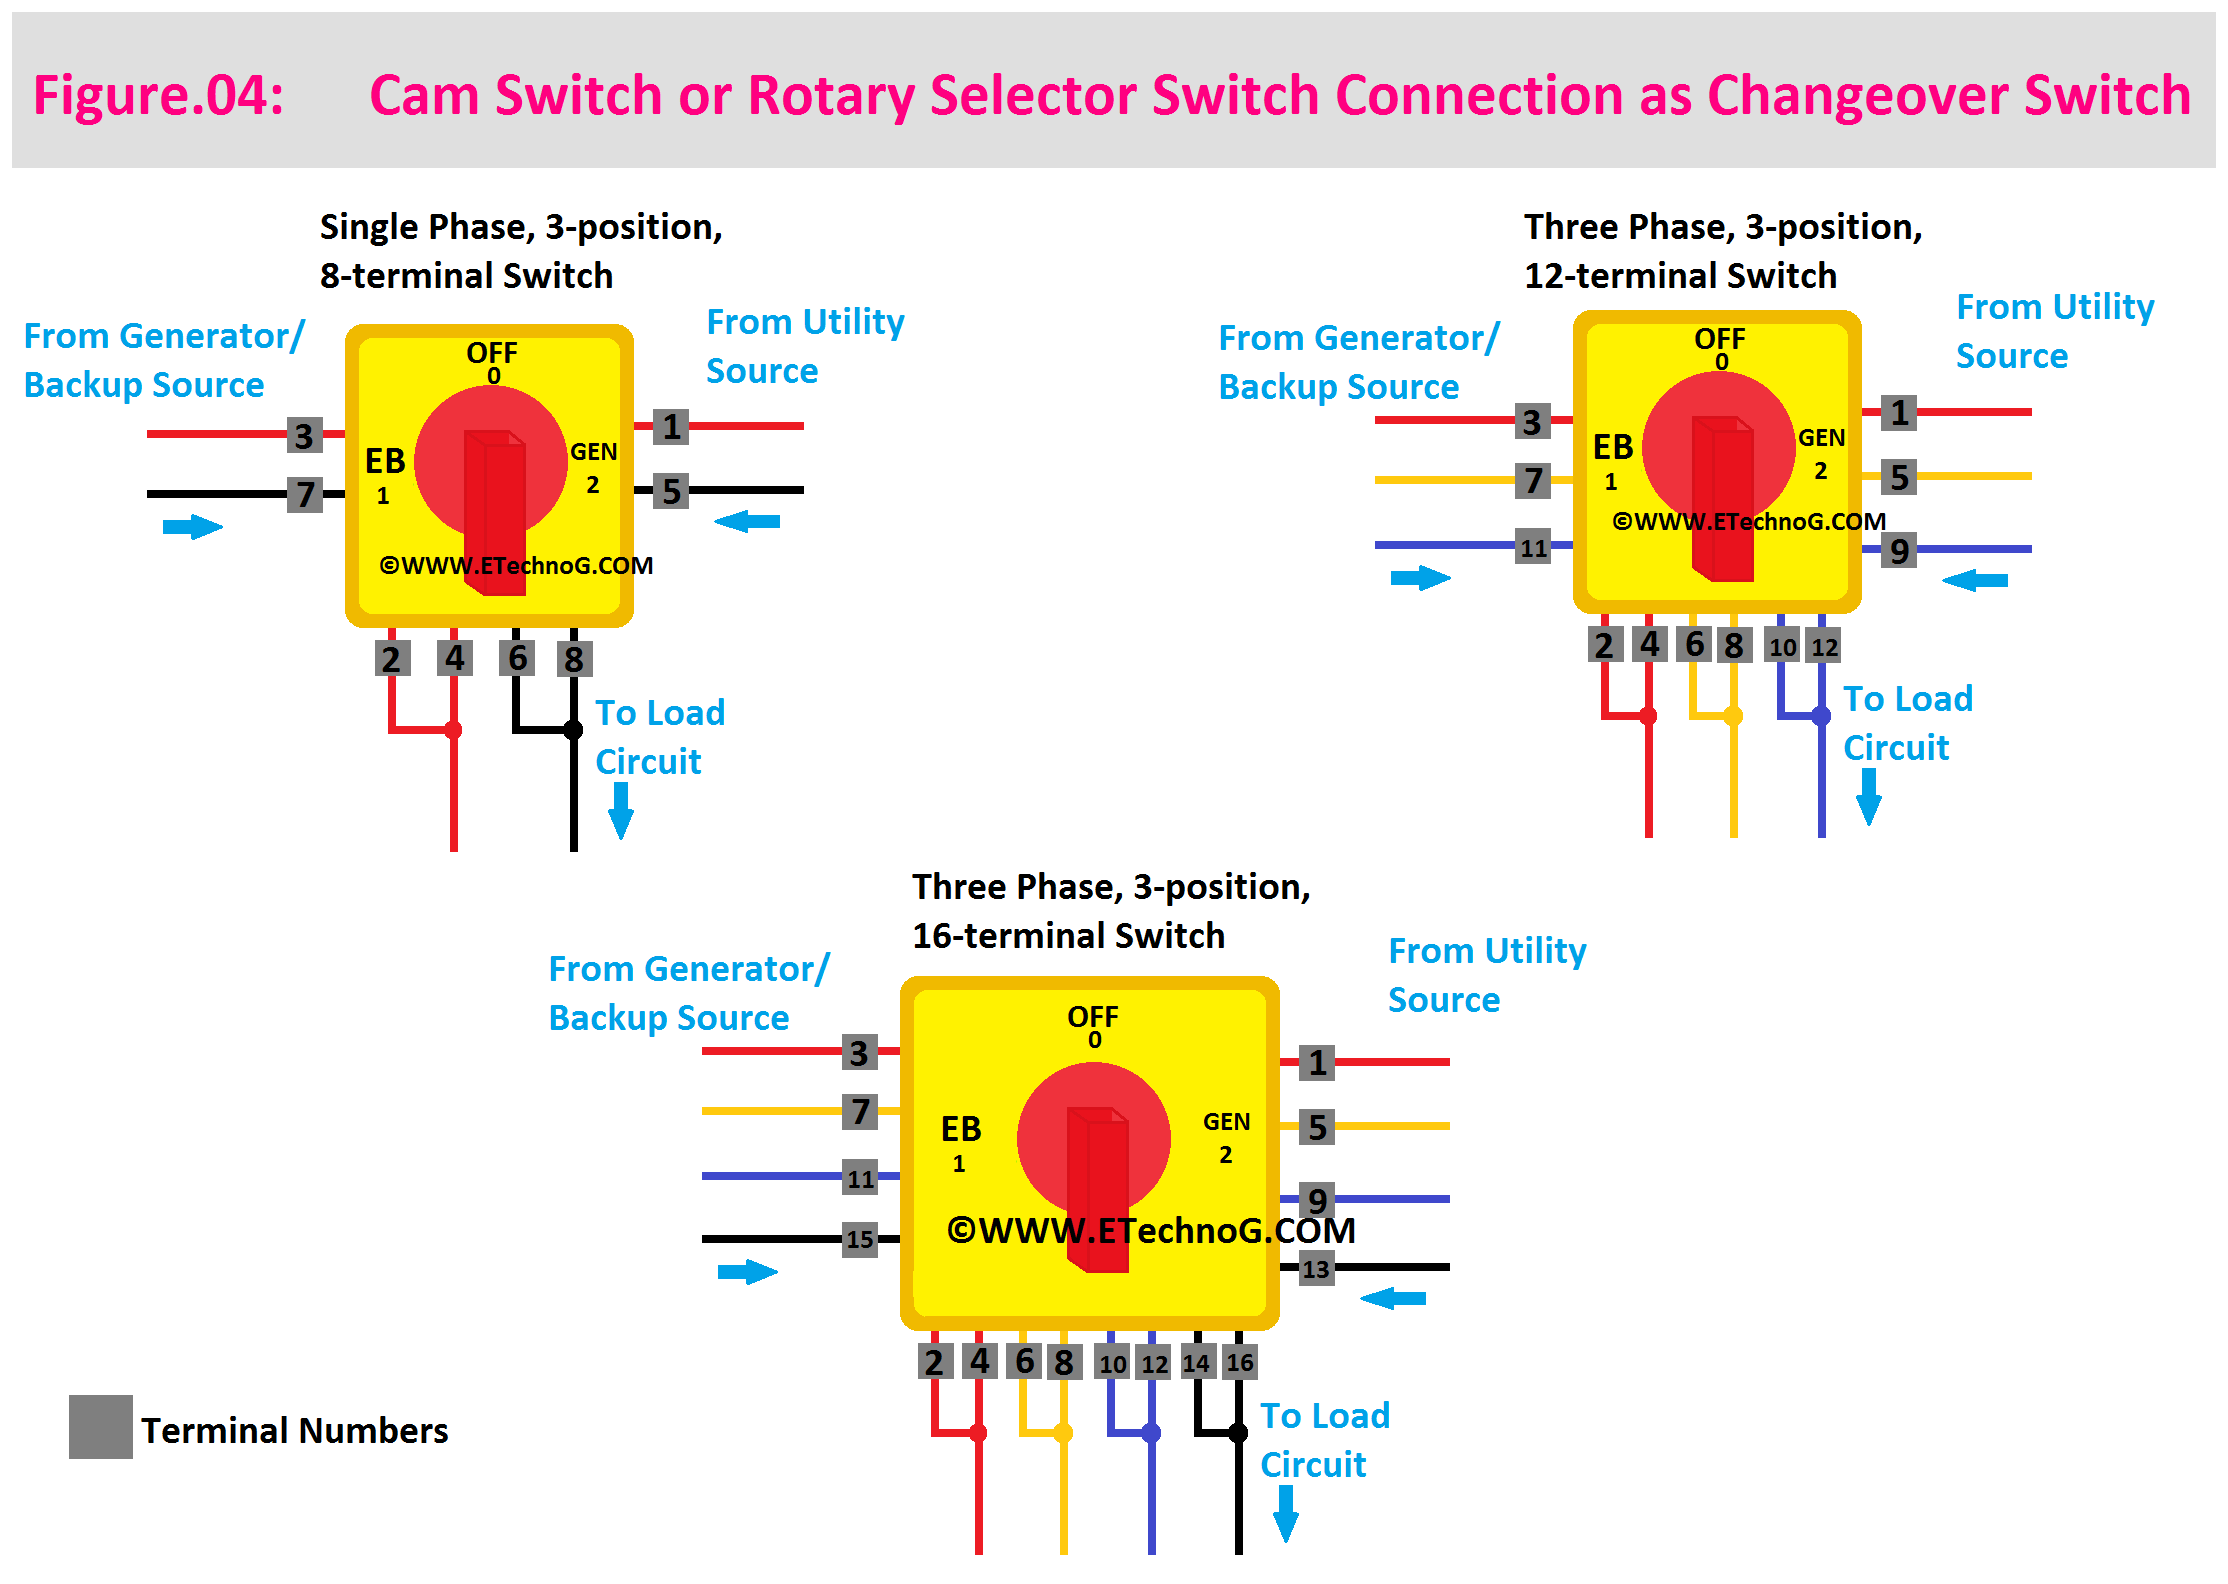 Cam Switch or Rotary Selector Switch Connection Diagram and Wiring Procedure such as -  Single Phase, 3-Position, 8-Terminal Switch  Three Phase, 3-Position, 12-Terminal Switch  Three Phase, 3-Position, 18-Terminal Switch